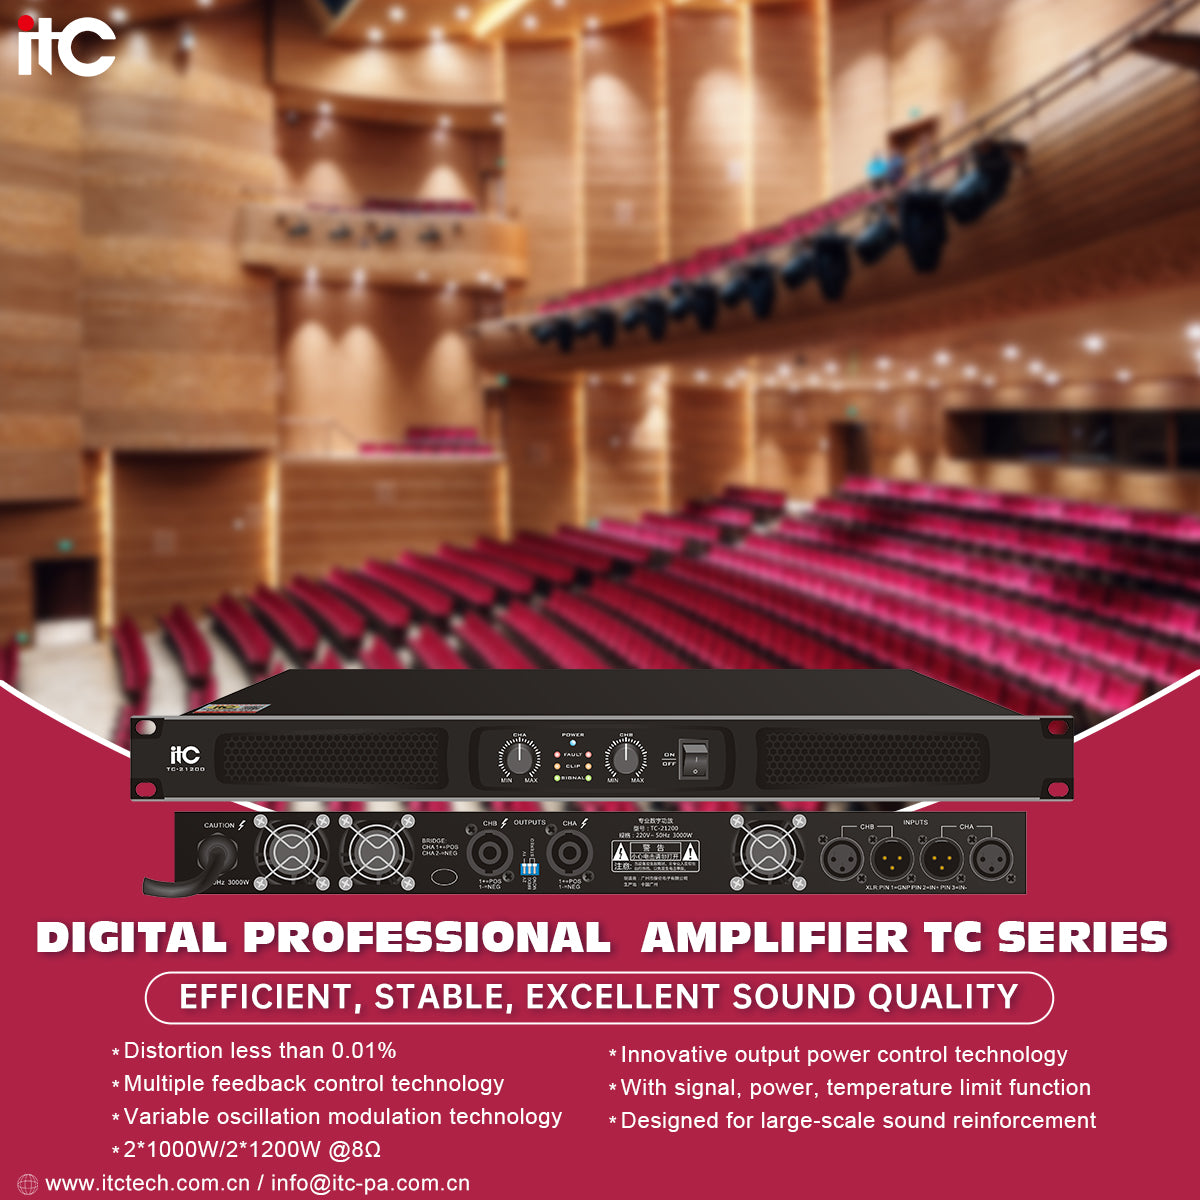 Functions_of_Amplifier_and_Advantages_of_Digital_Professional_Amplifier